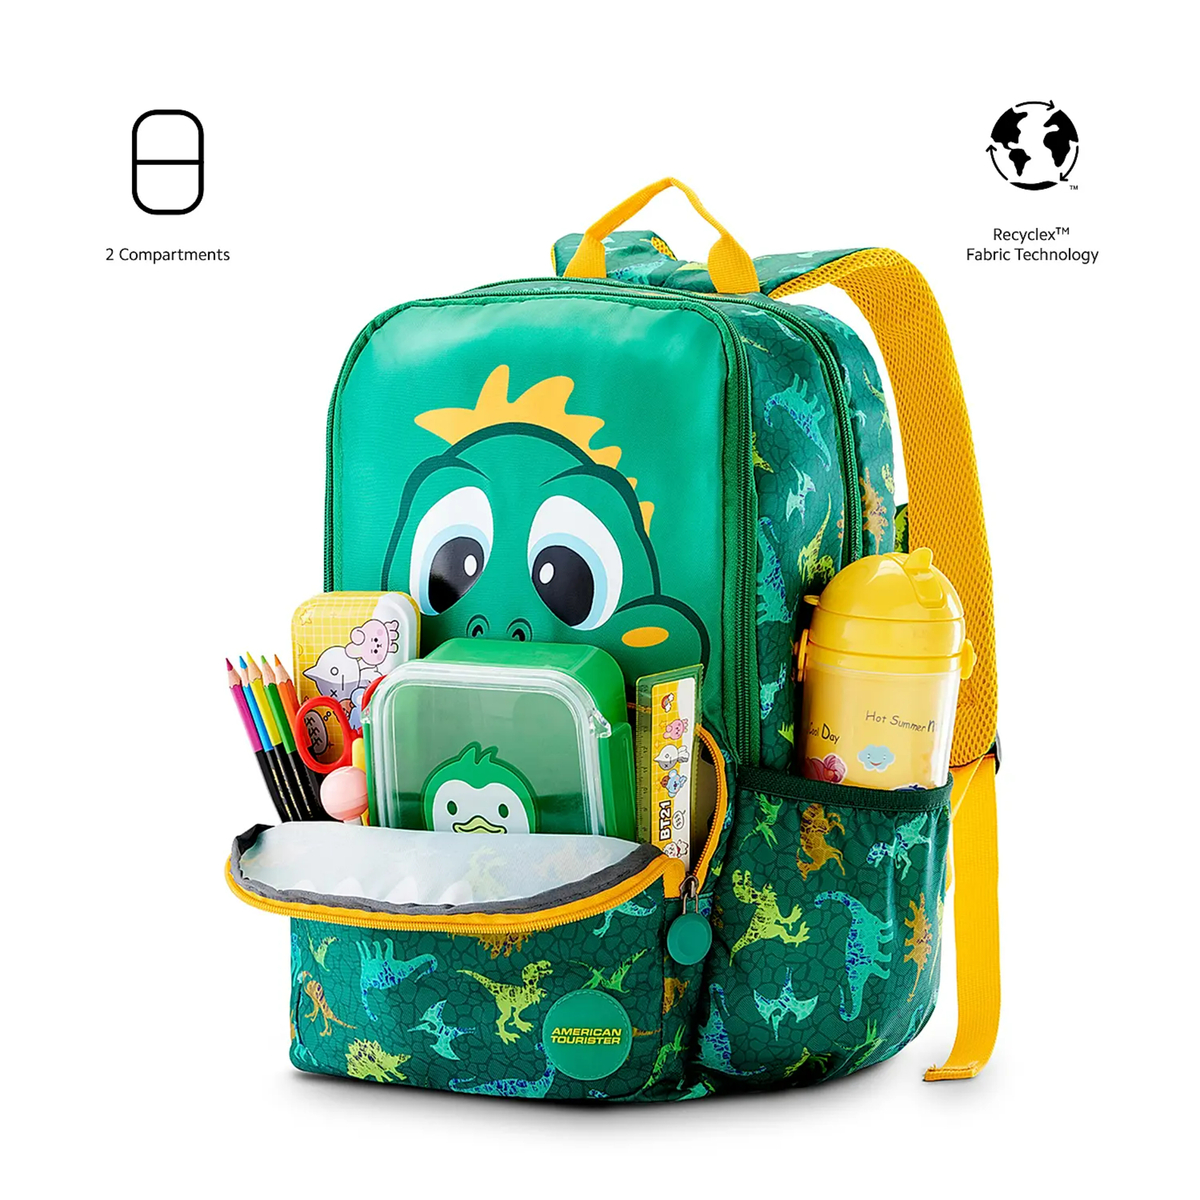 American Tourister Diddle 2.0 School Bagpack, 21 L Volume, Dino Green